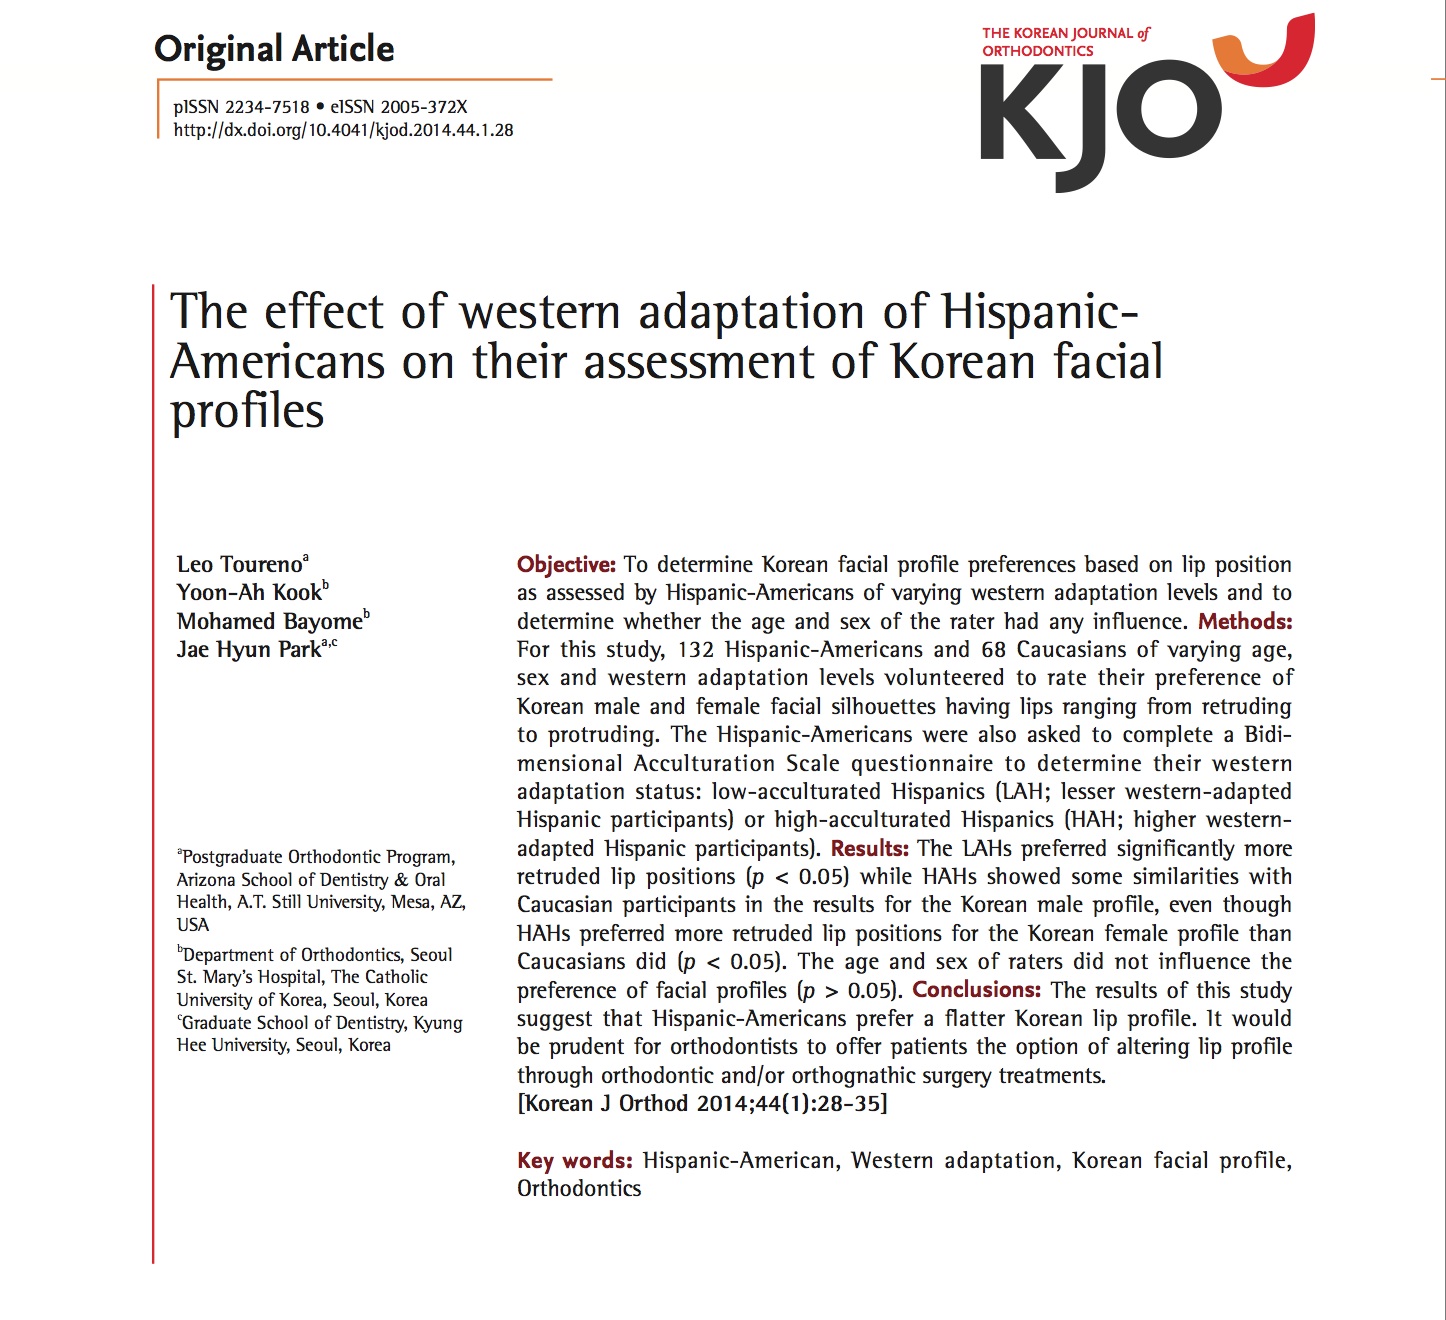 The Effect of Western Adaptation of Hispanic Americans on their Assessment of Korean Facial Profile